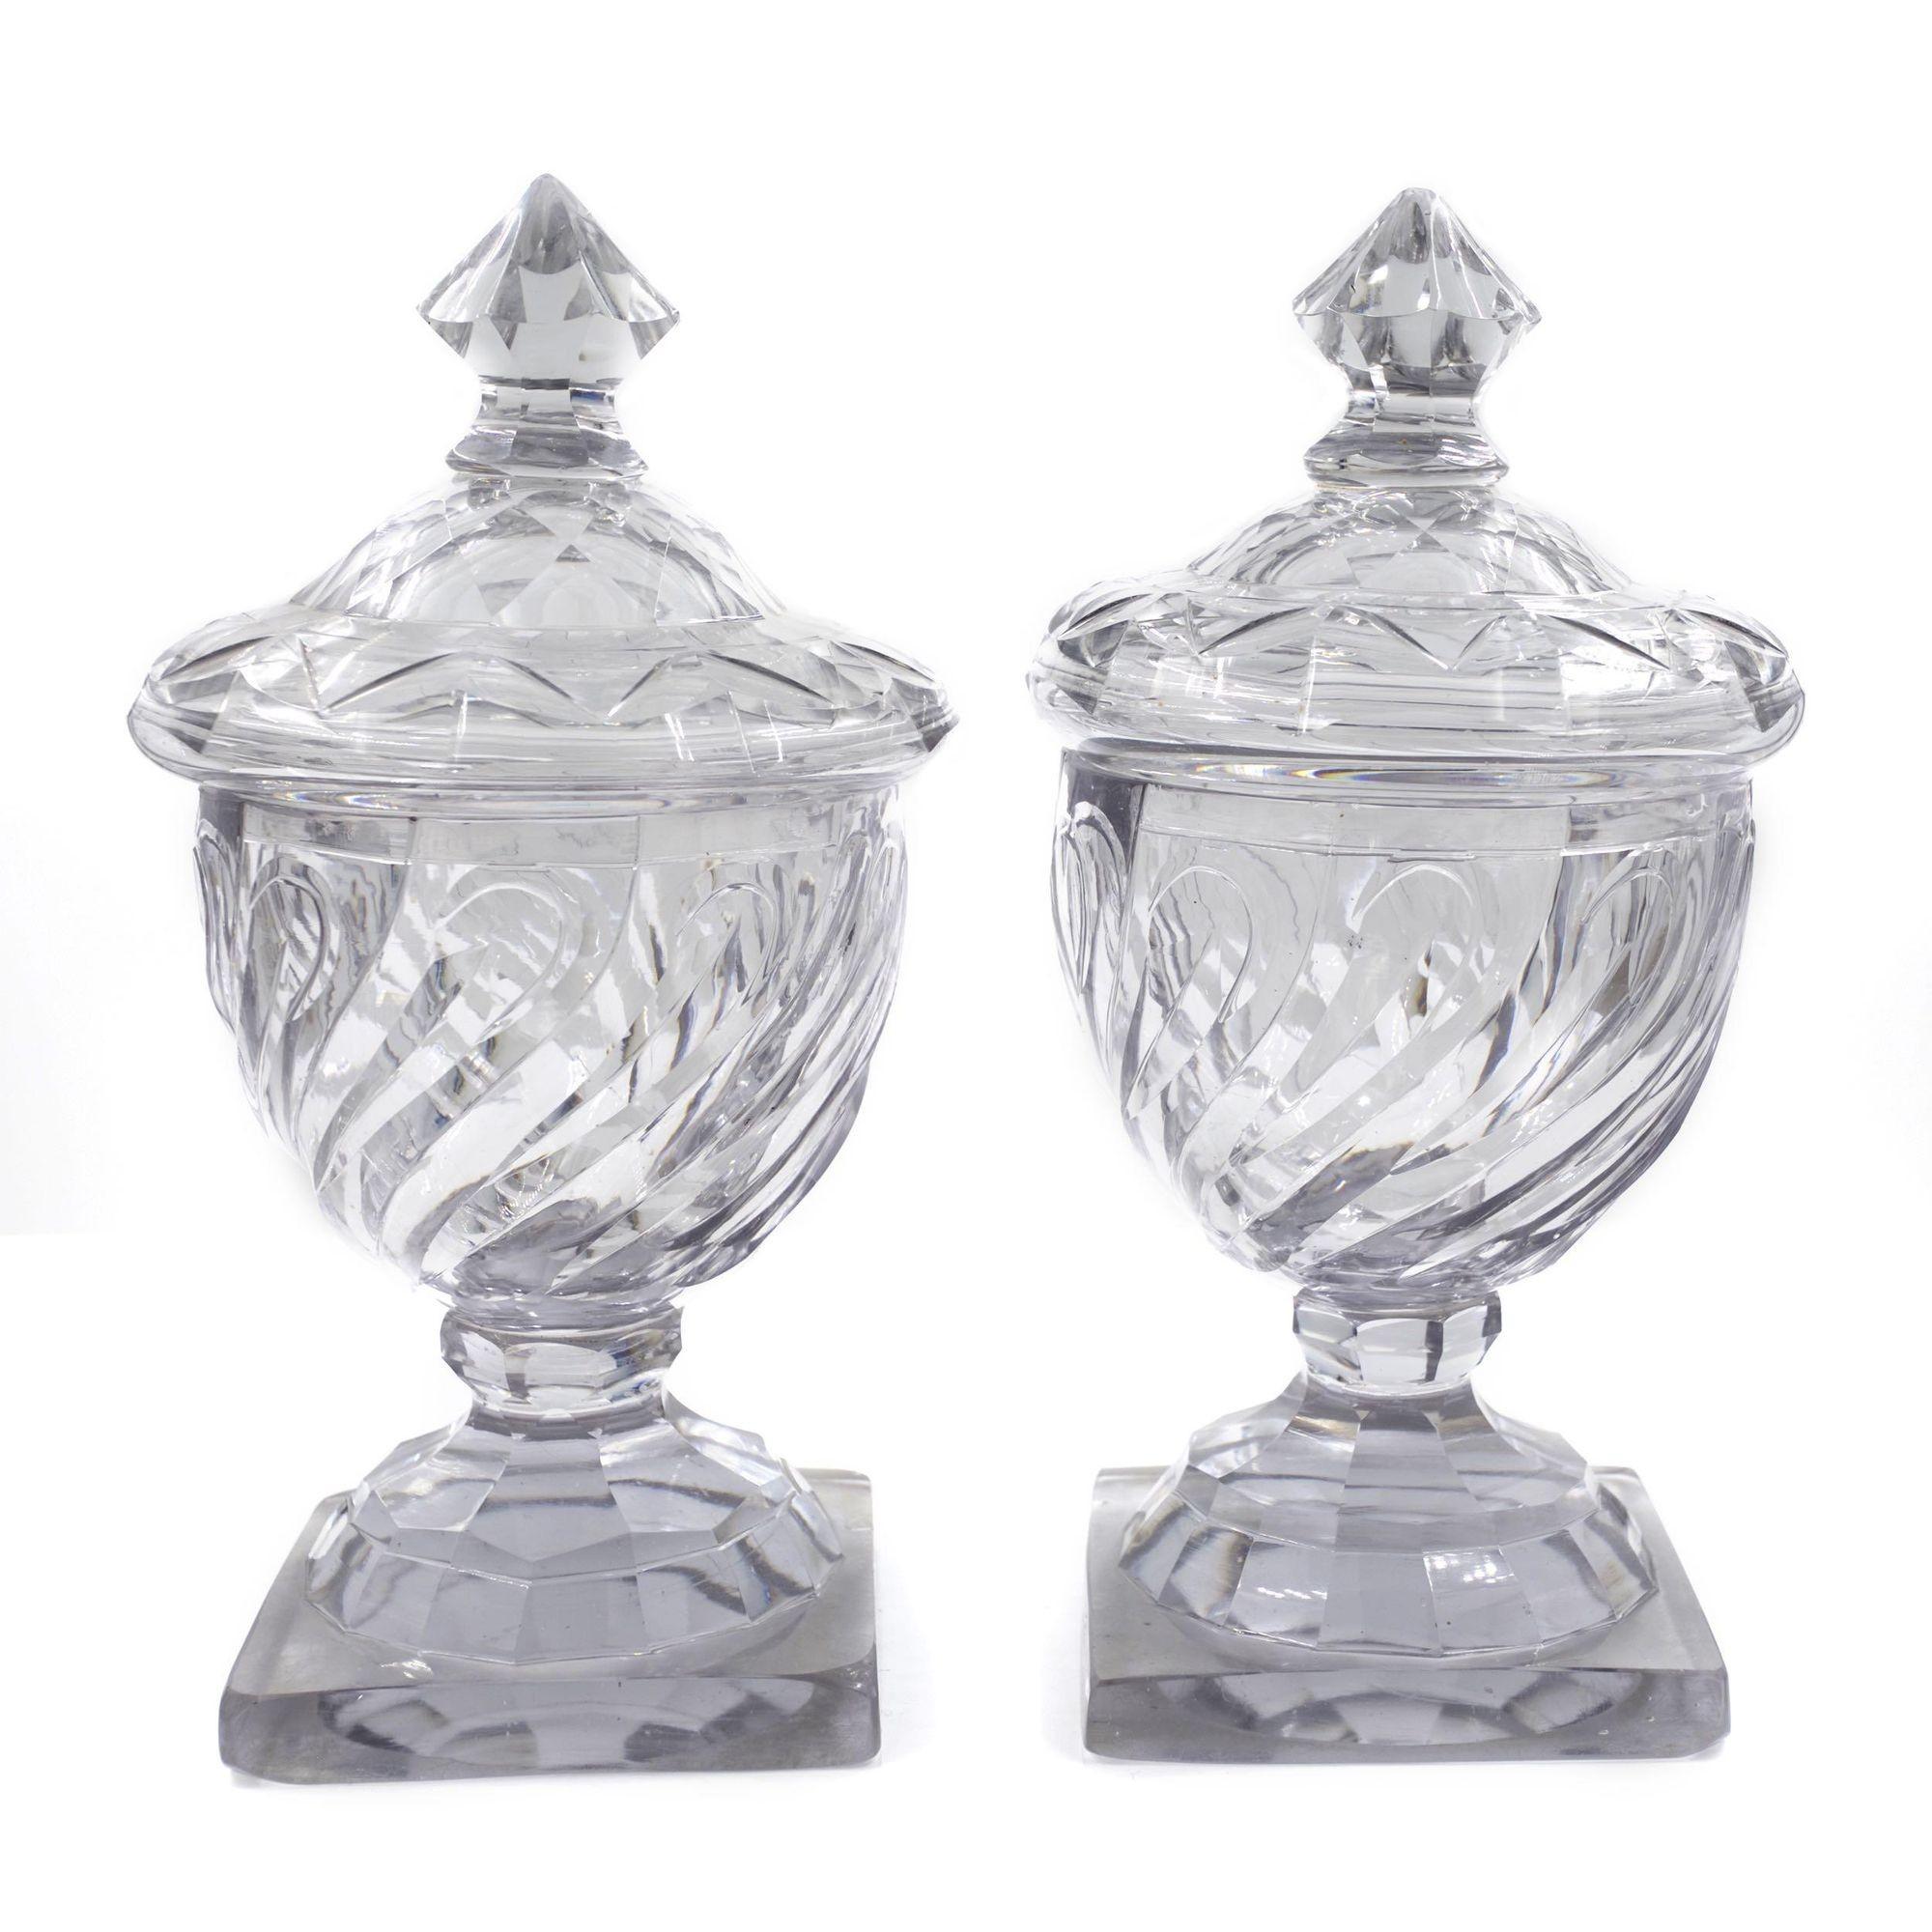 18th Century Pair of English Georgian Cut Swirled Glass Urns with Dome Lids In Good Condition For Sale In Shippensburg, PA